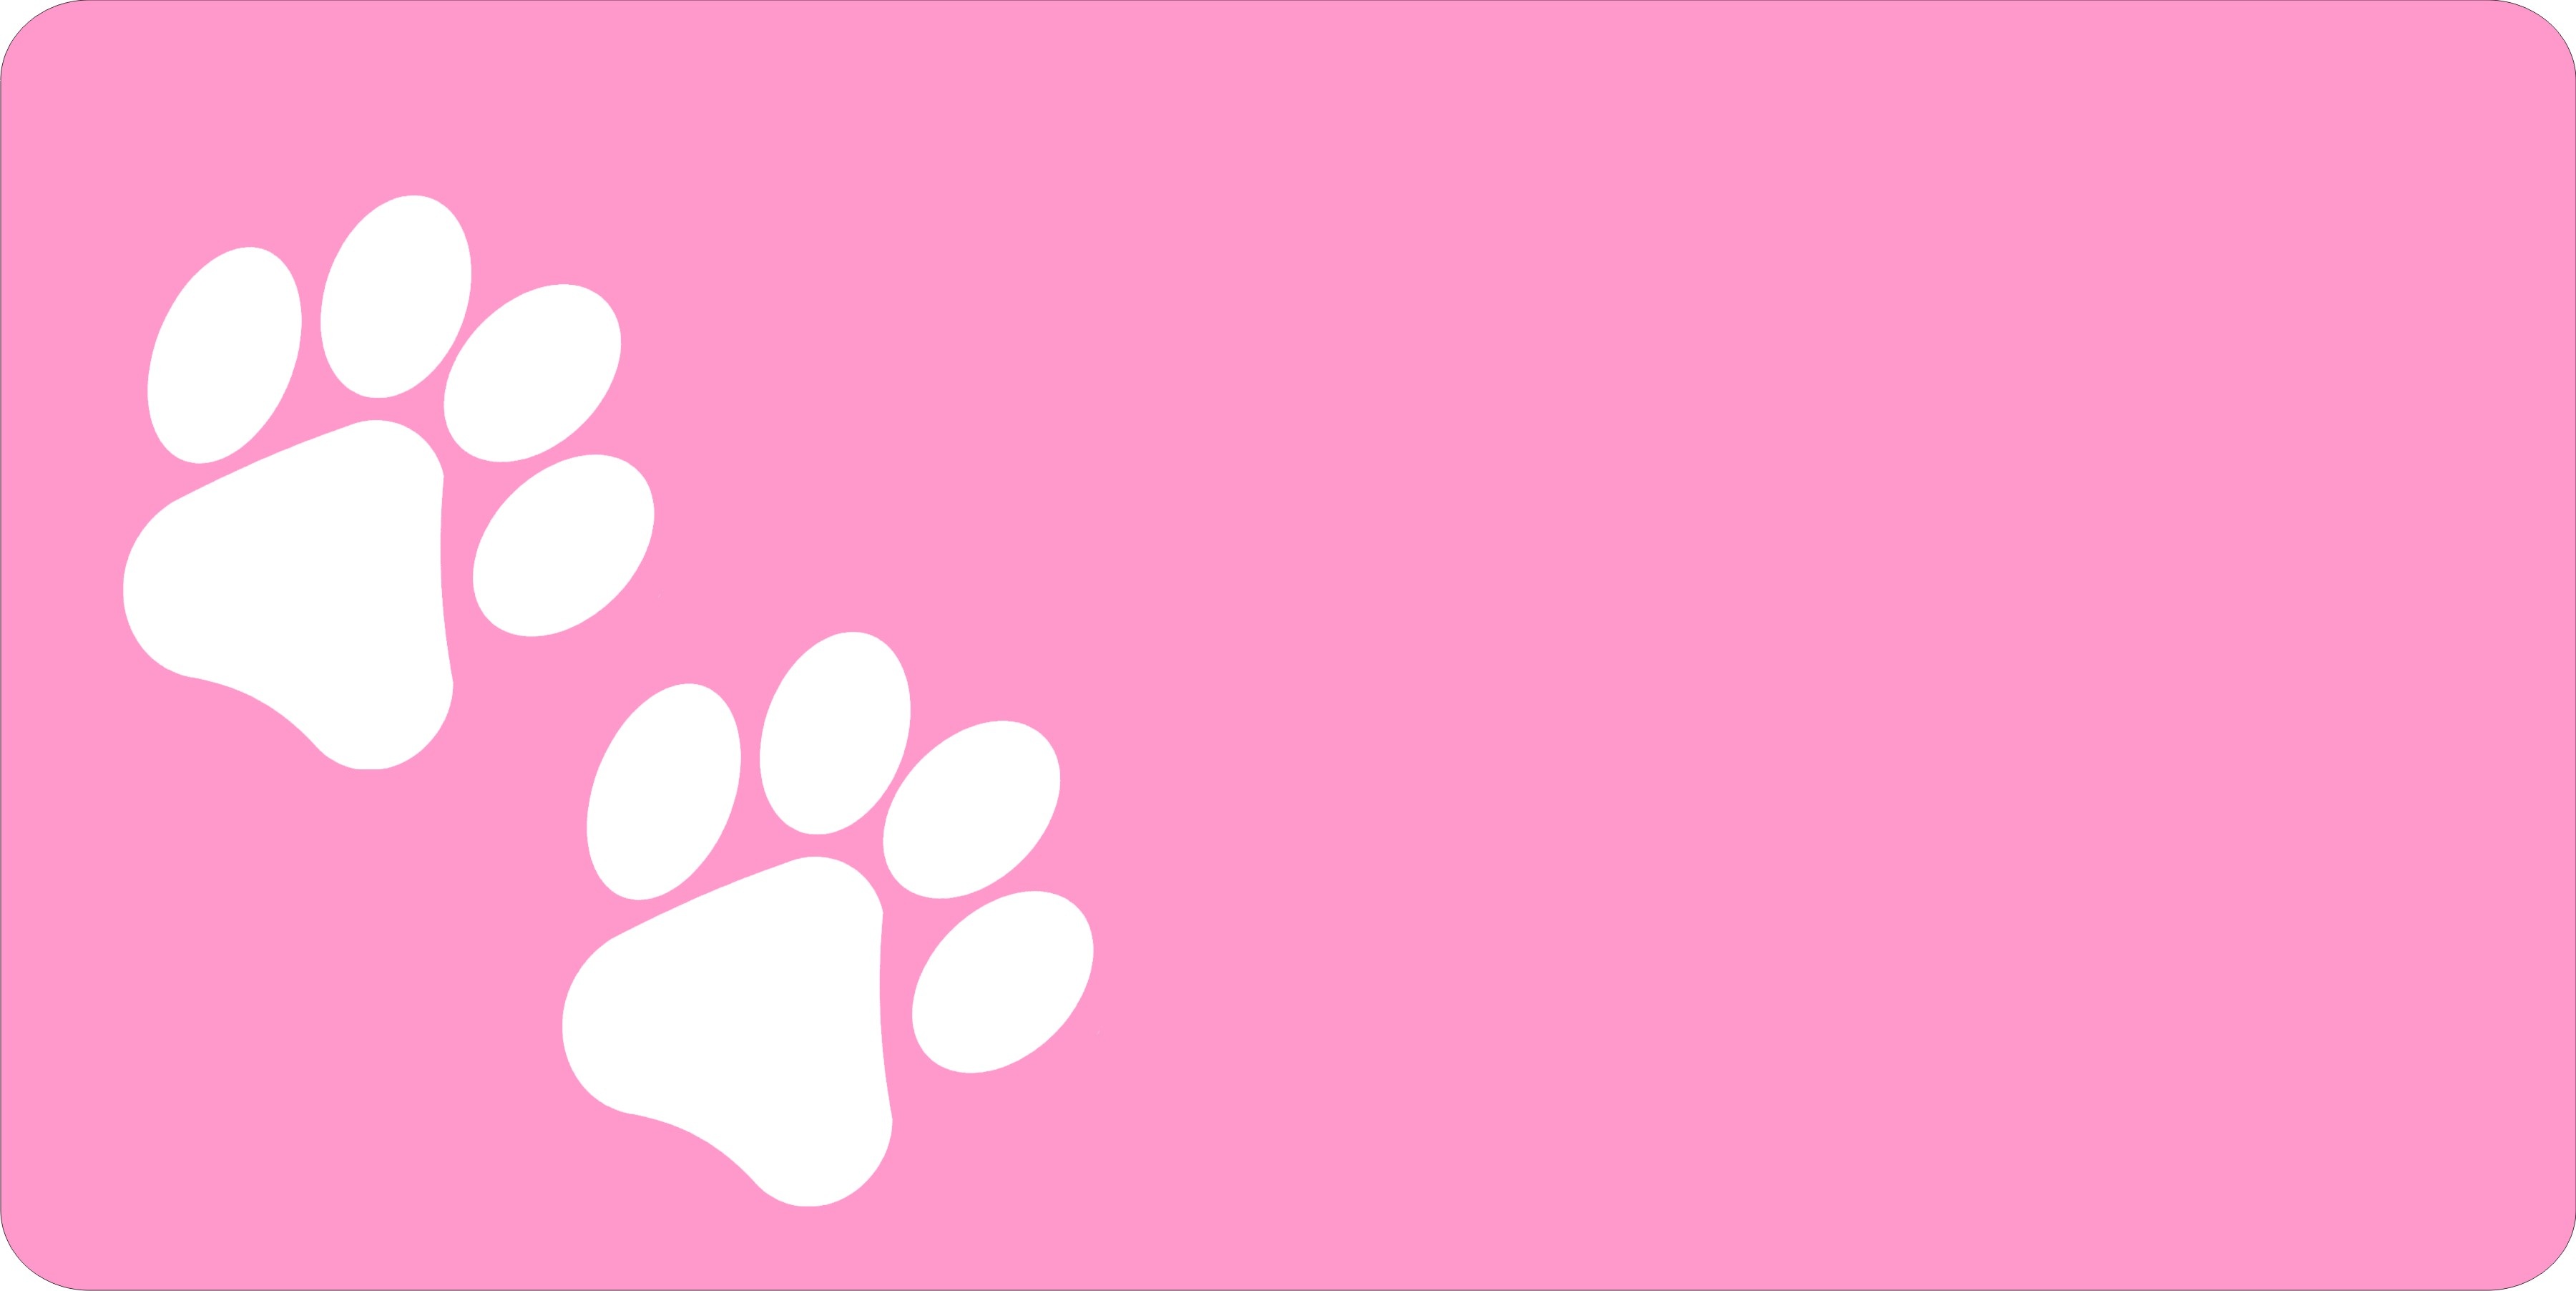 White Paw Prints Offset On Pink LICENSE PLATE Free Personalization on this PLATE